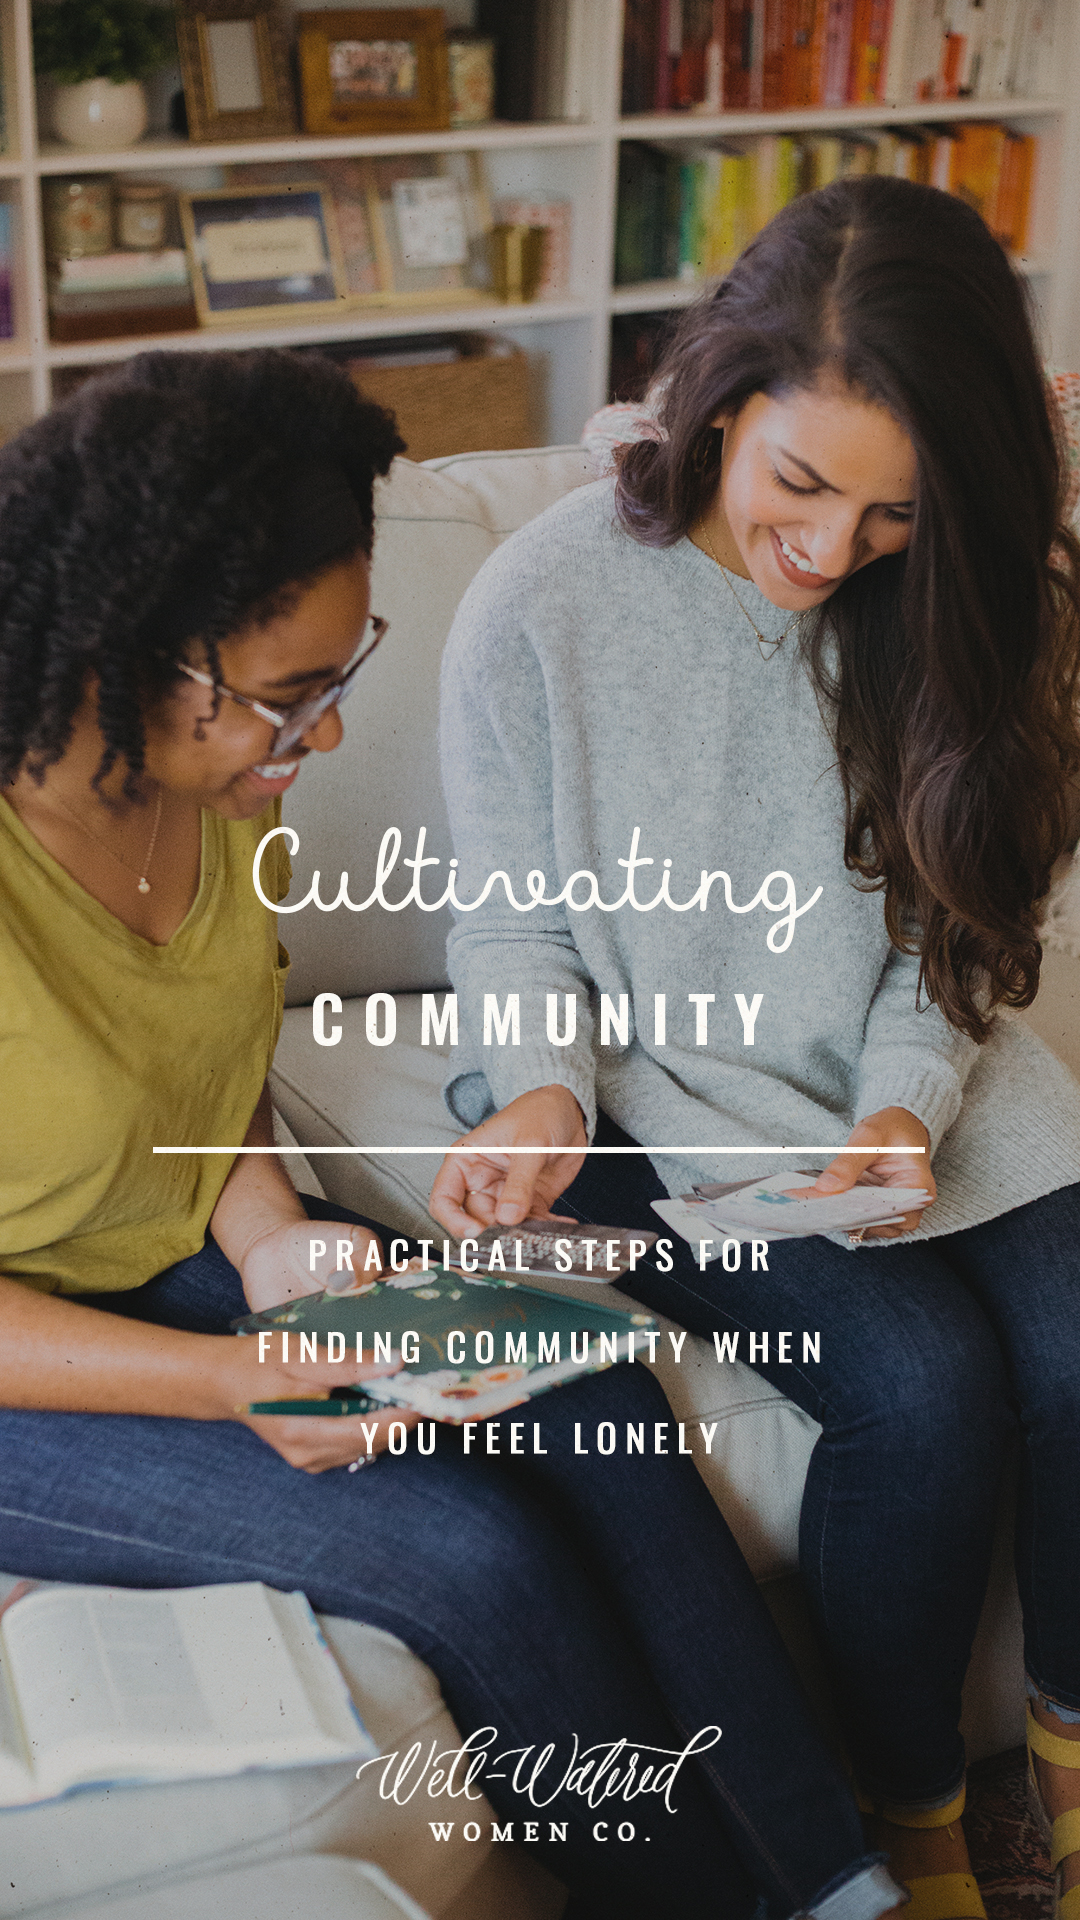 Well Watered Women Blog | Cultivating Community